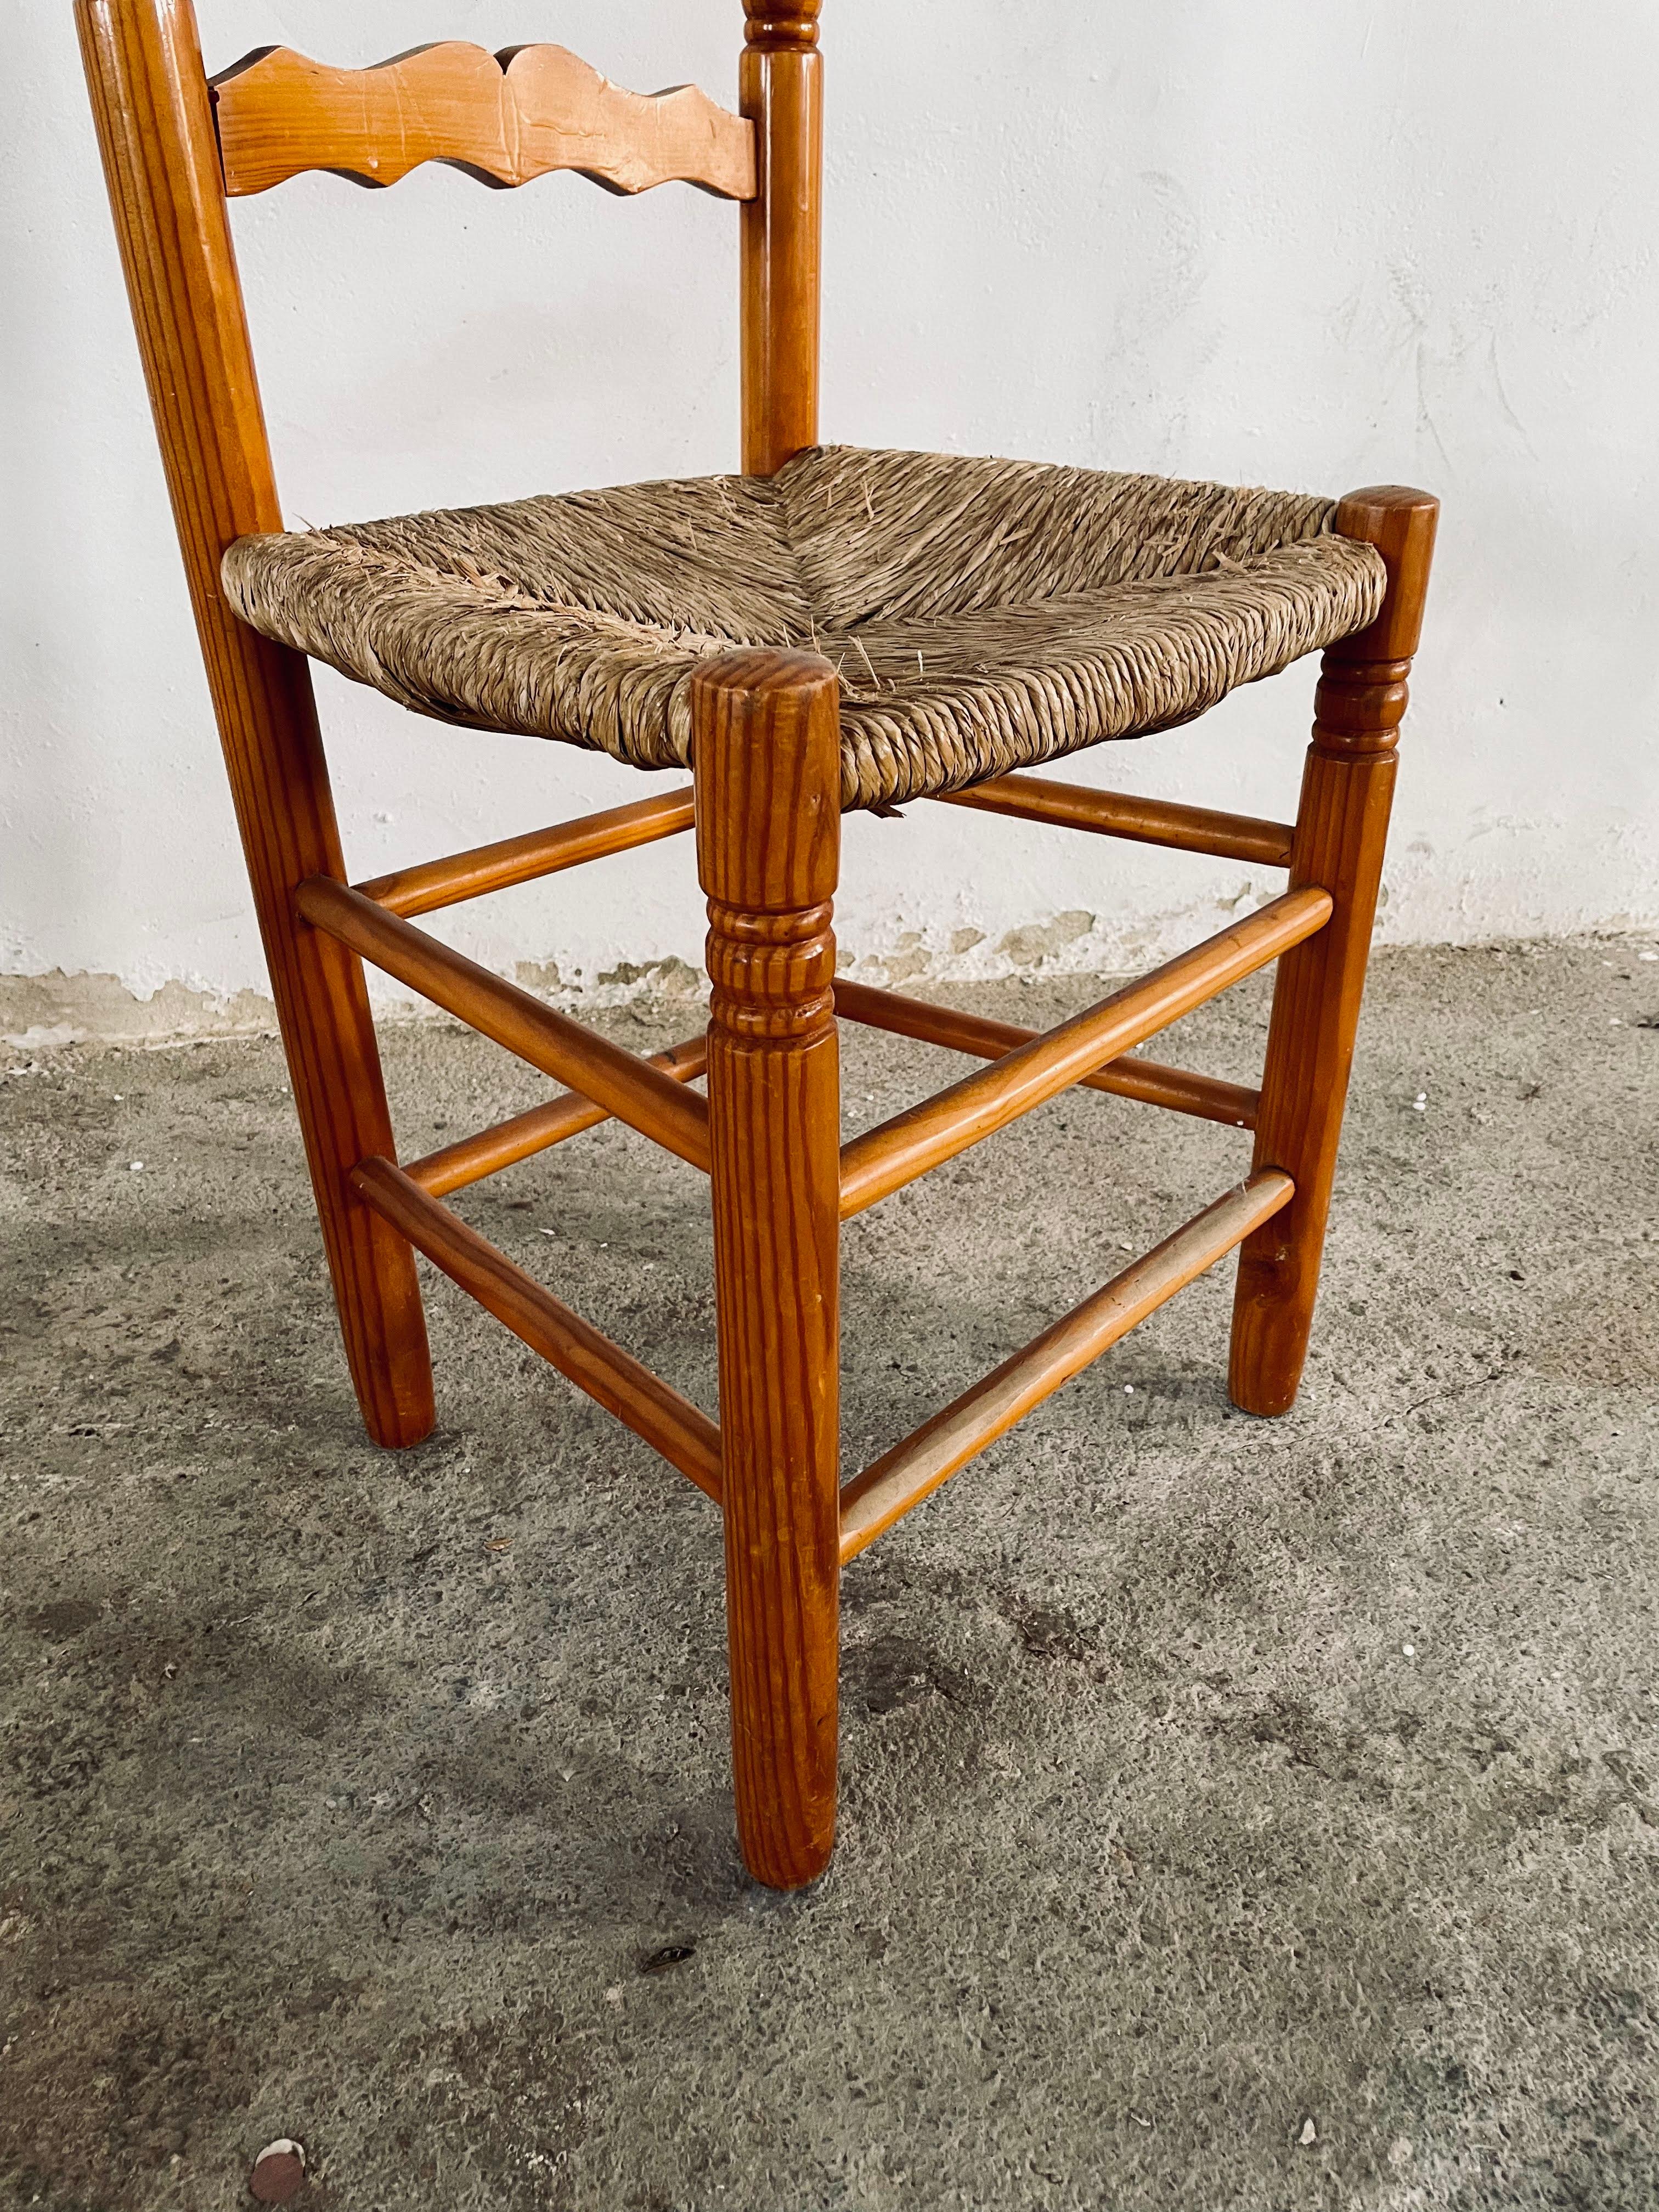 Vintage Spanish Rush Seat Chair, Wicker and turned wood Castillian Chair For Sale 1